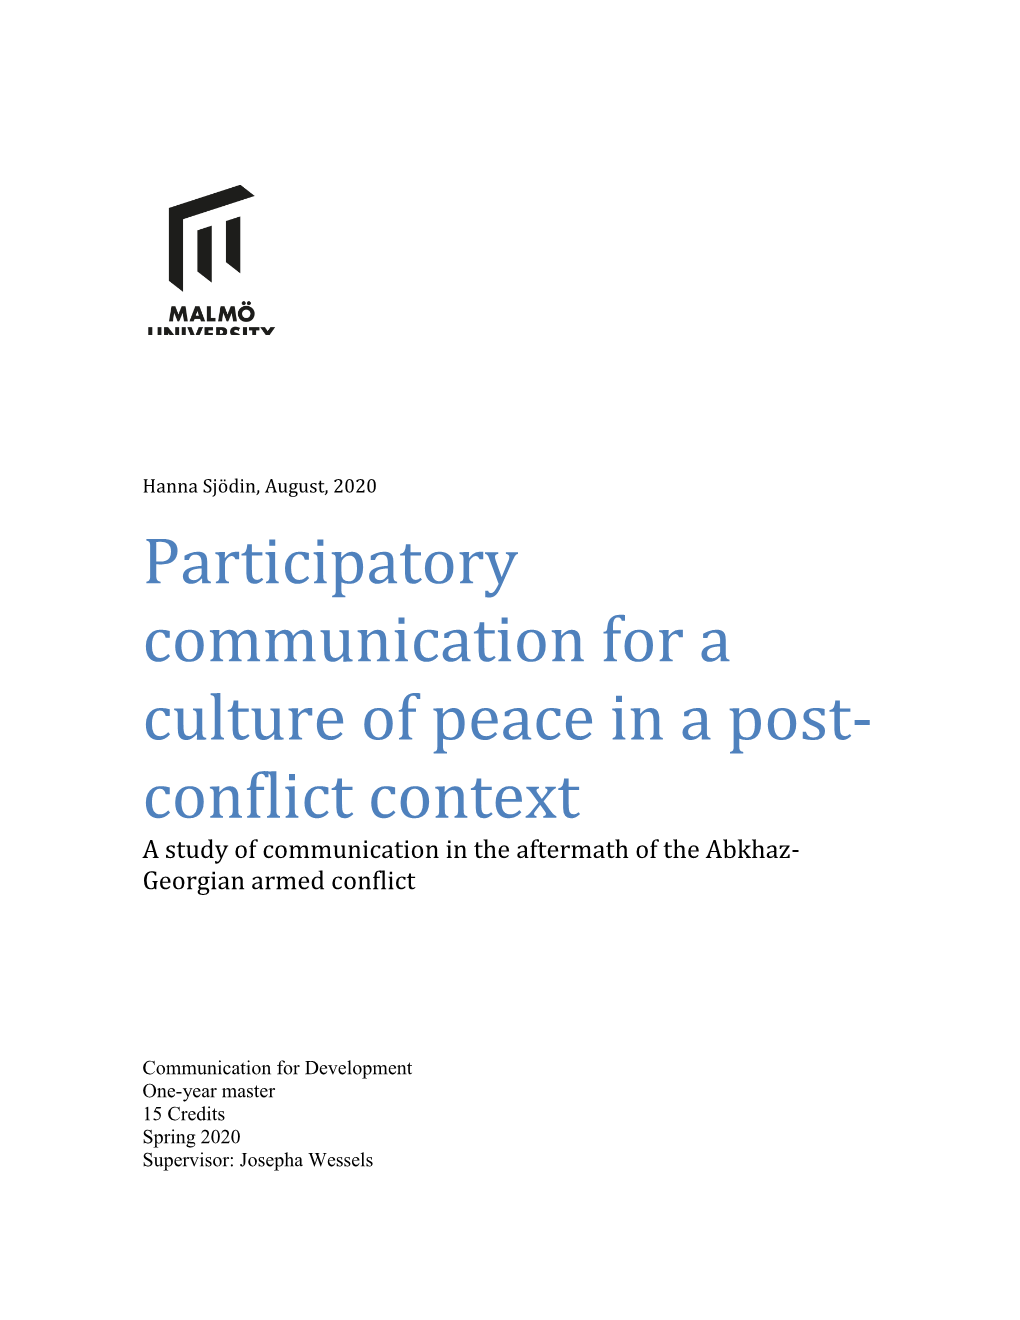 Participatory Communication for a Culture of Peace in a Post-Conflict Context